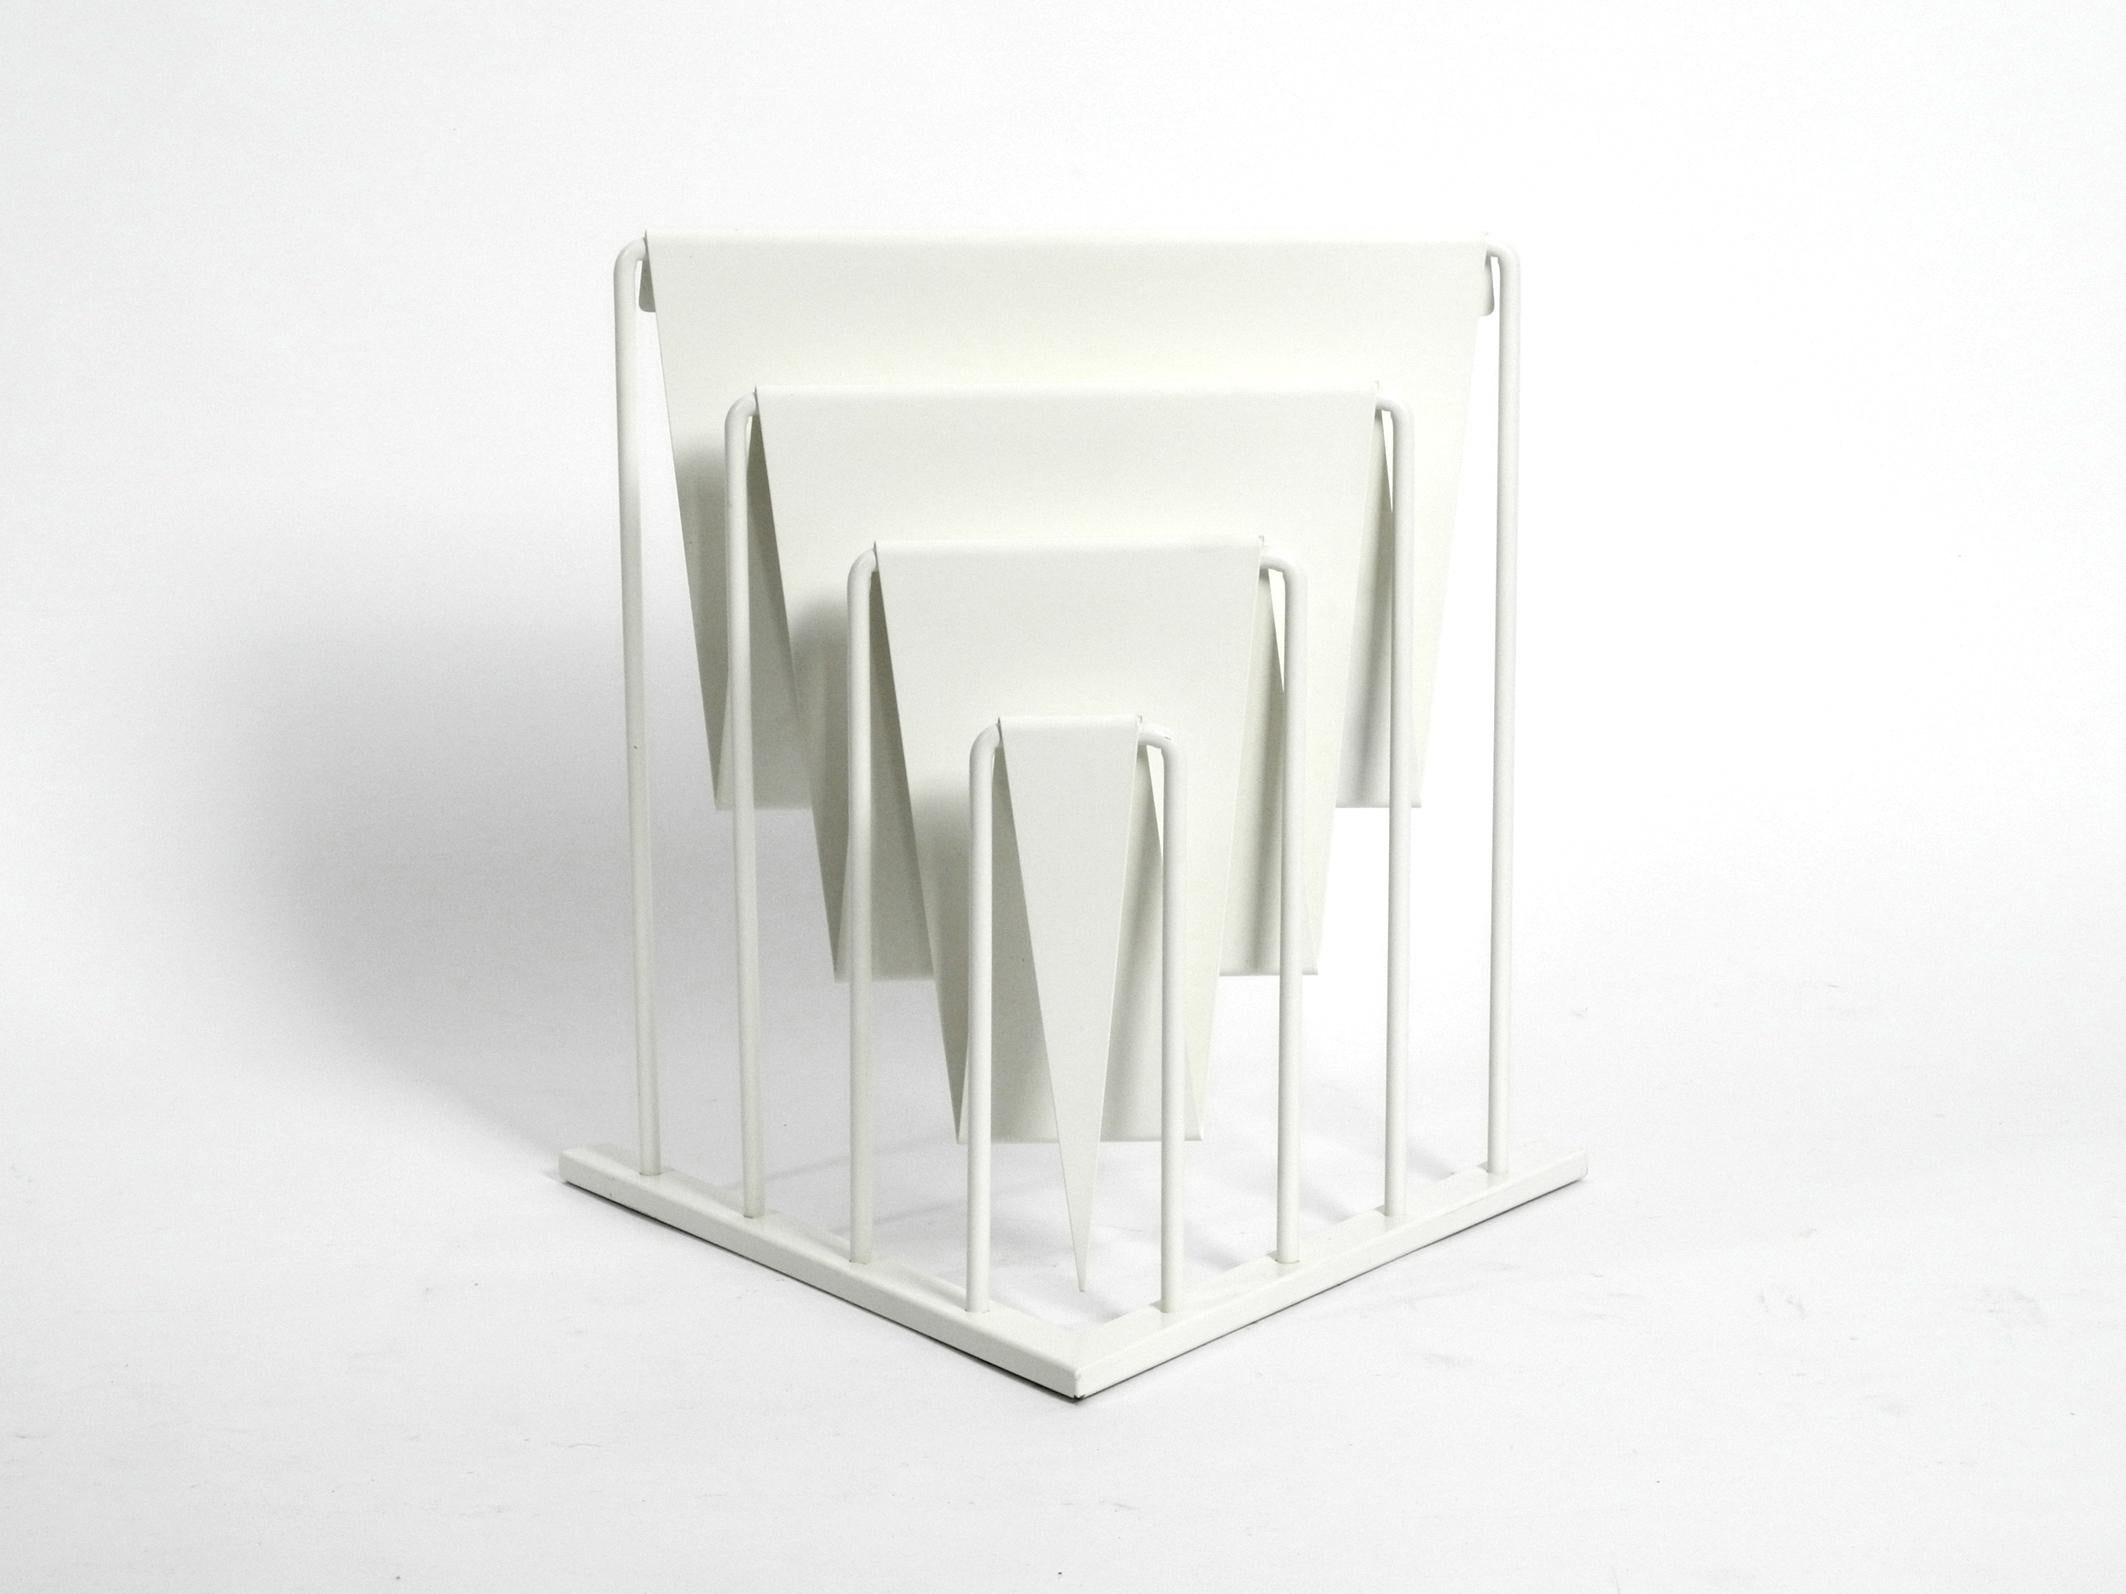 Heavy metal magazine rack in white.
In rare minimalistic postmodern design.
Very high quality interesting minimalistic 1980s design.
In very good vintage condition without damages.
100% original condition. Not refurbished.
Suitable for all